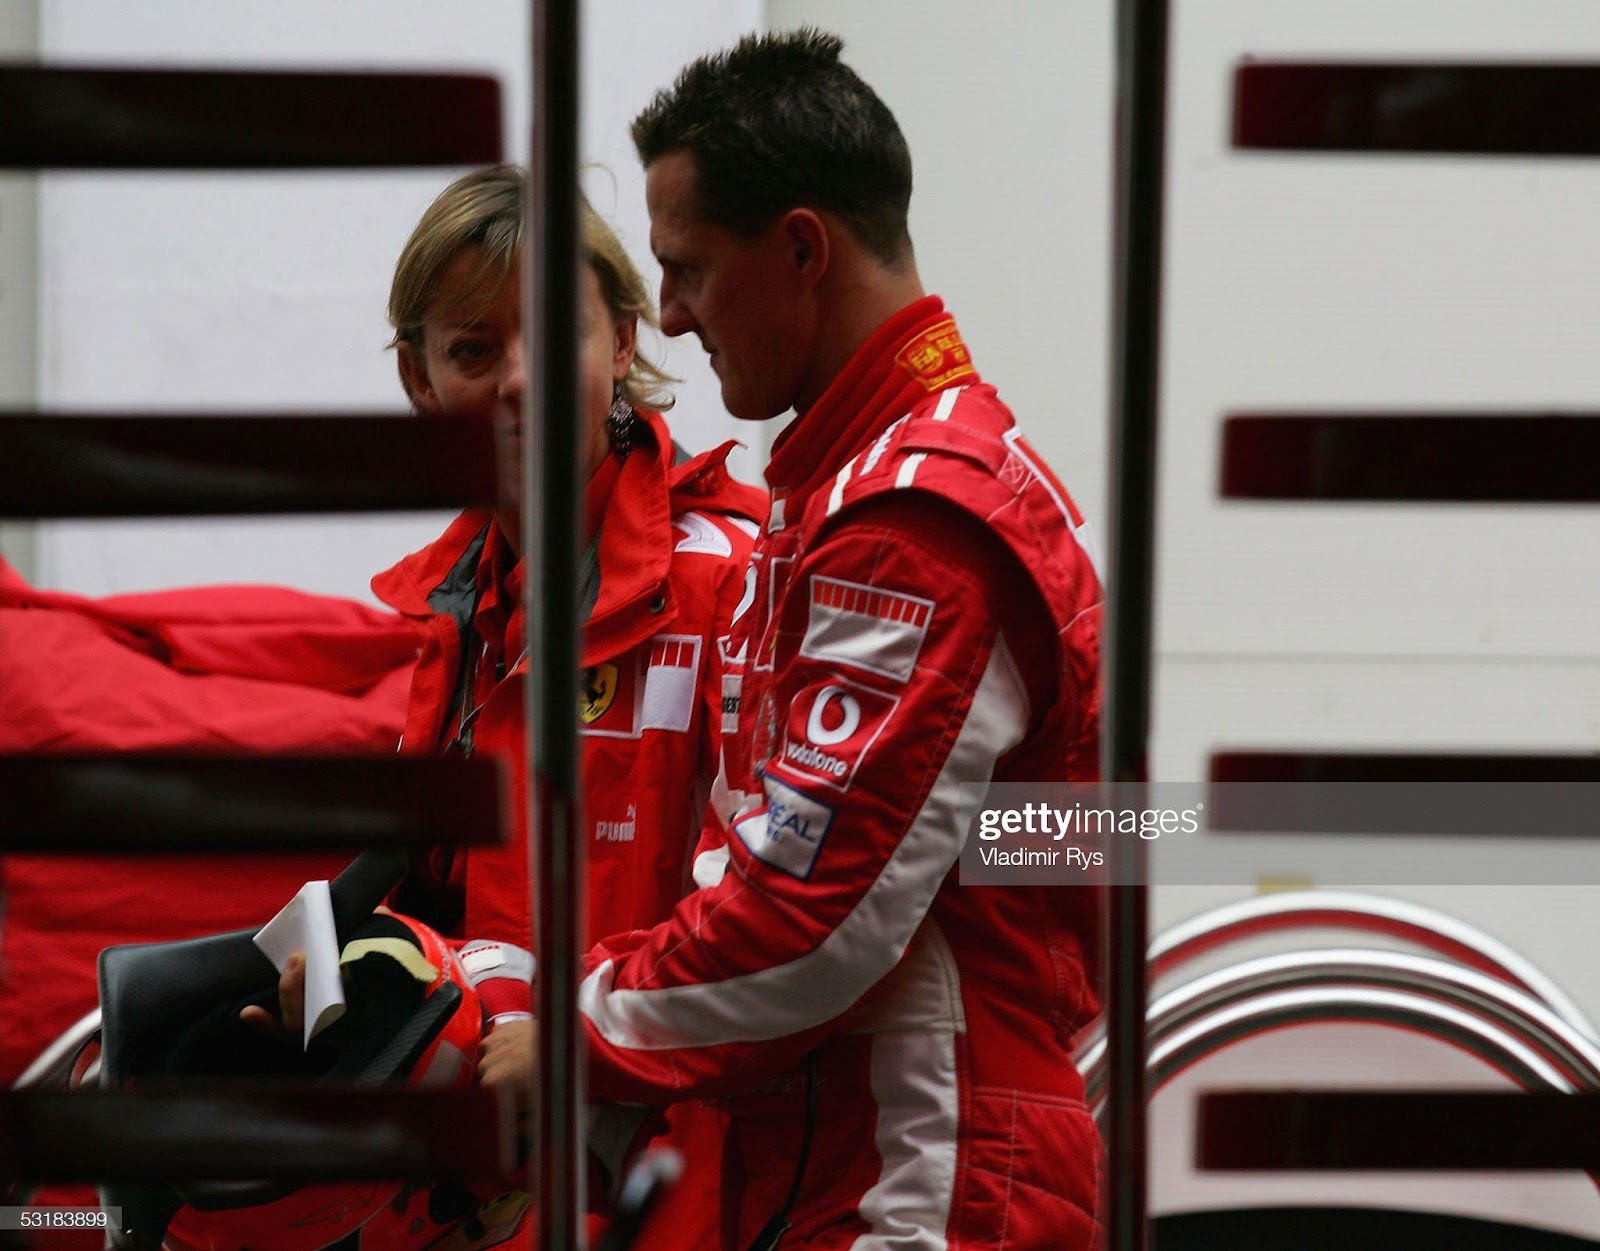 Michael Schumacher, Ferrari, talks with his press officer Sabine Kehm after the qualifying for the French F1 Grand Prix at Magny Cours on July 2, 2005.